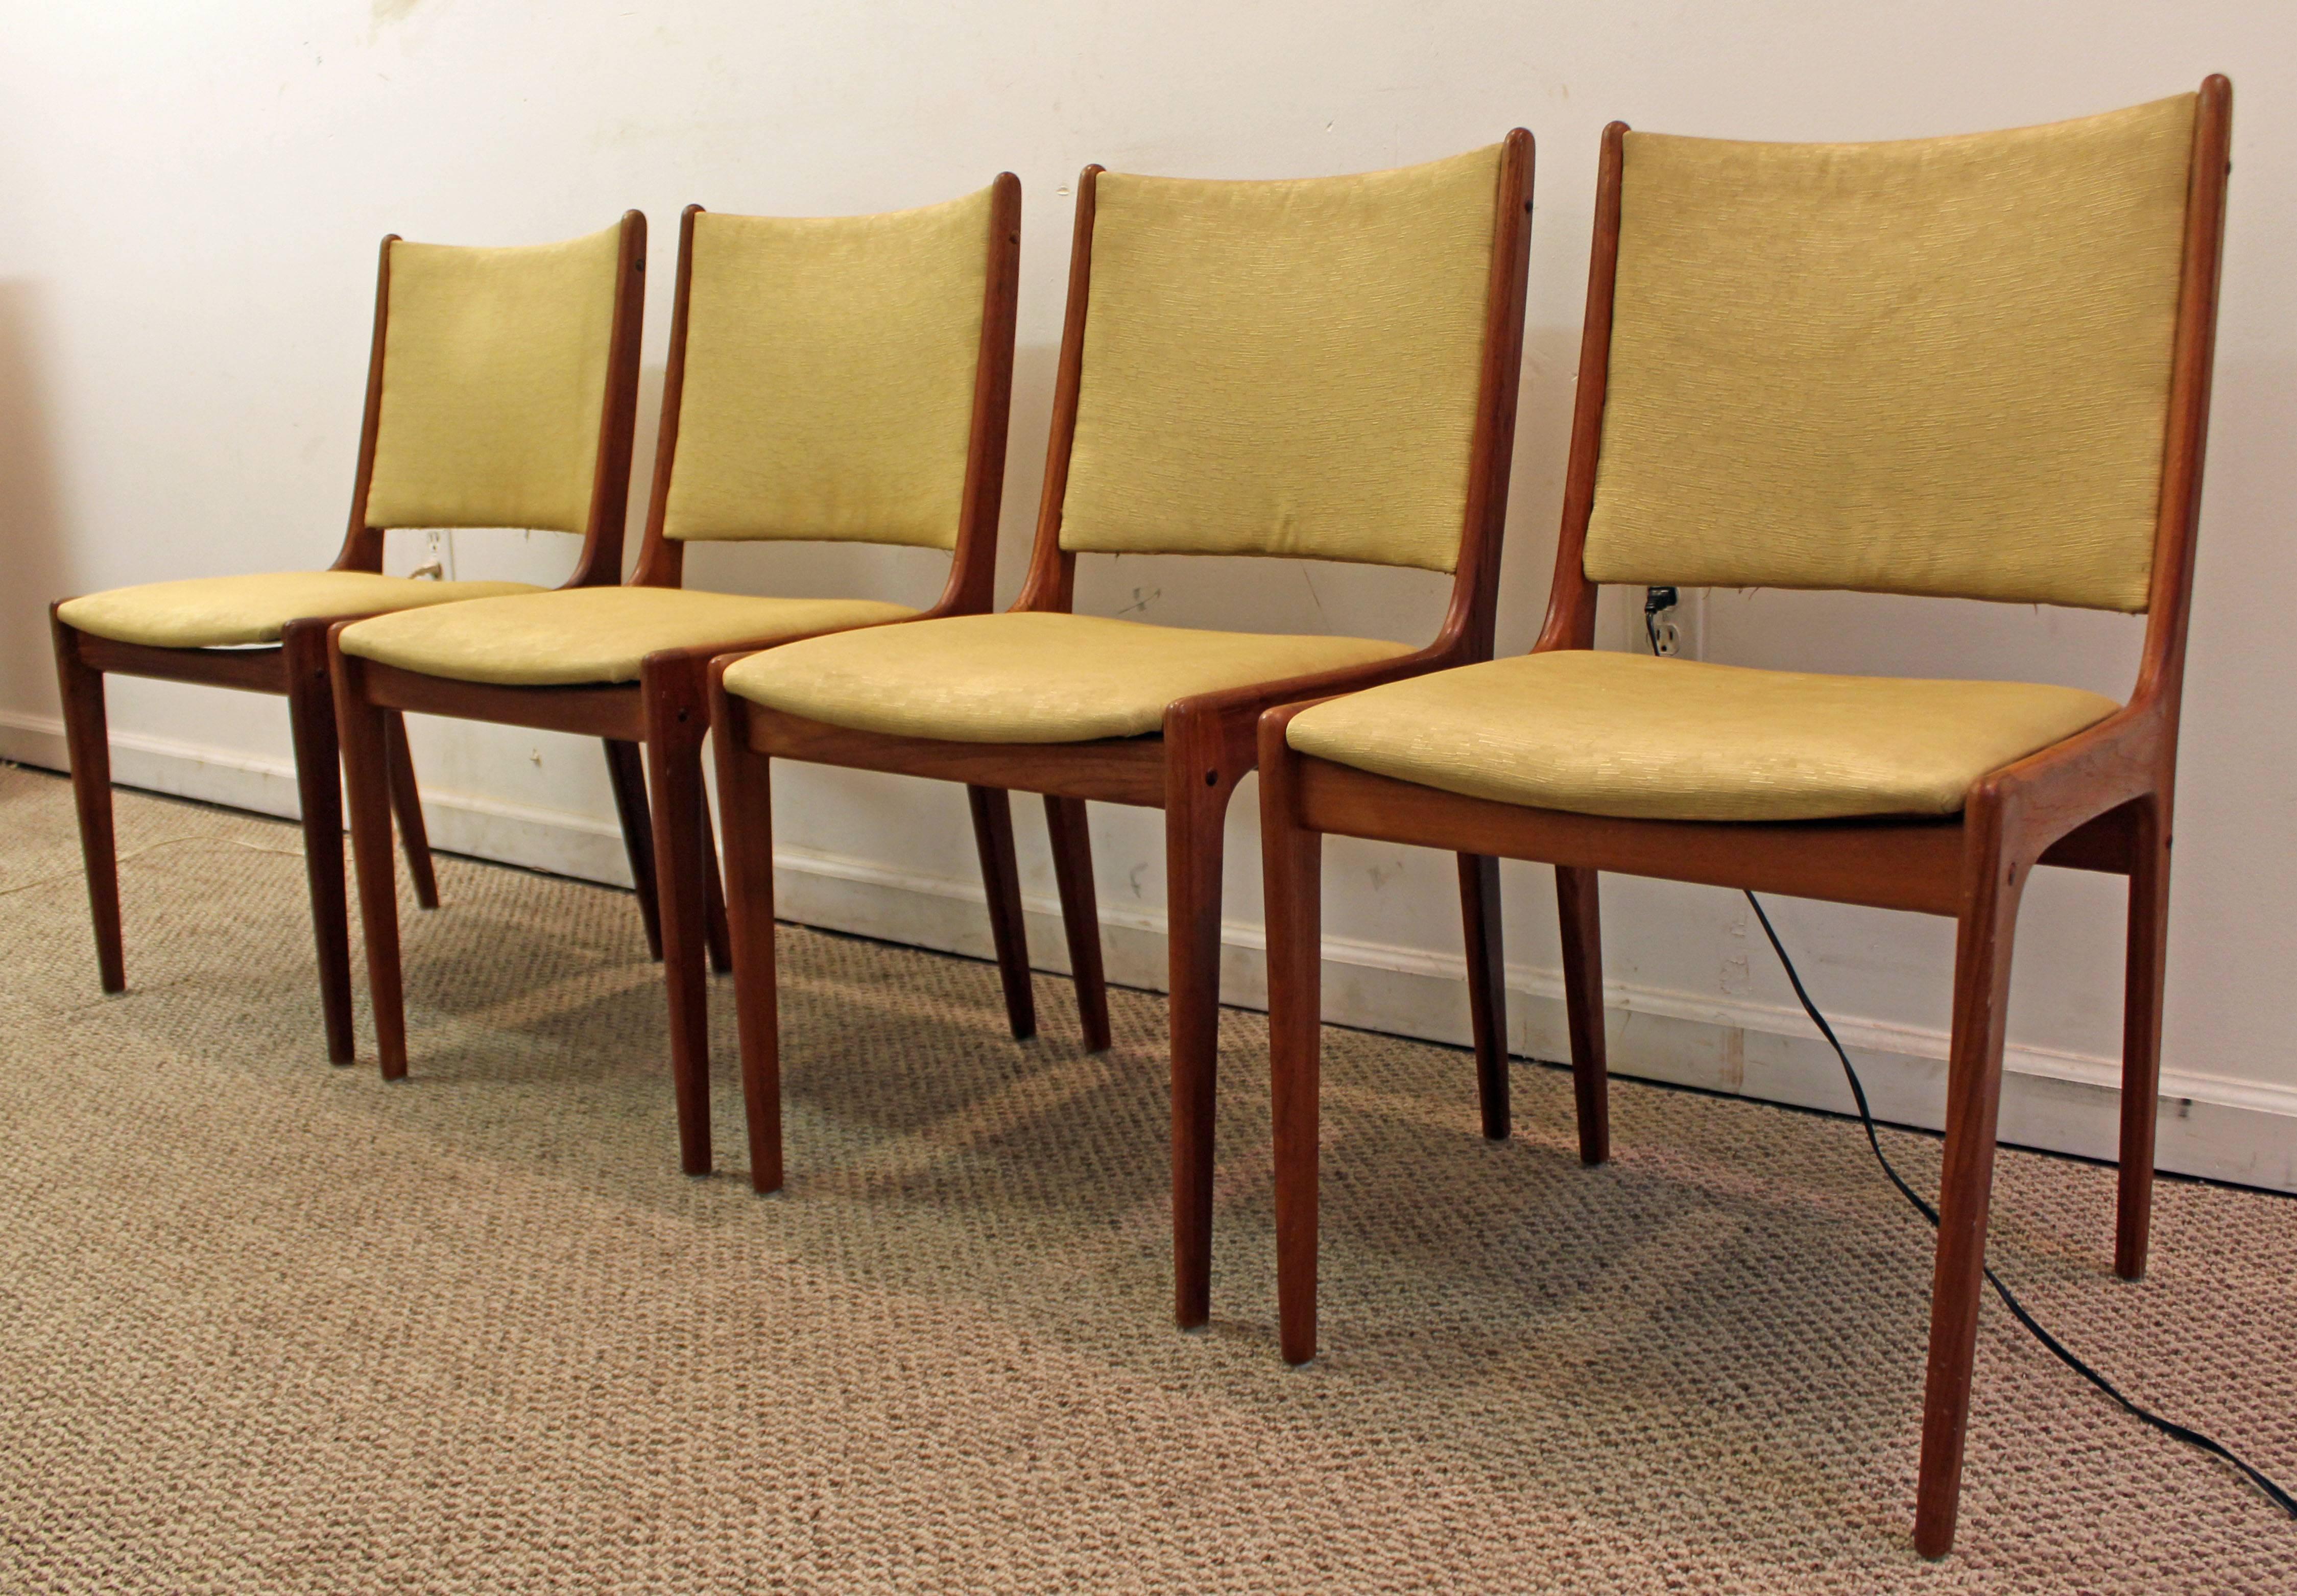 Offered is a very cool modern chair set. They are made of teak with upholstered seats and backs. They are in decent condition, but need work, can stand to be reupholstered.

Approximate dimensions:
19